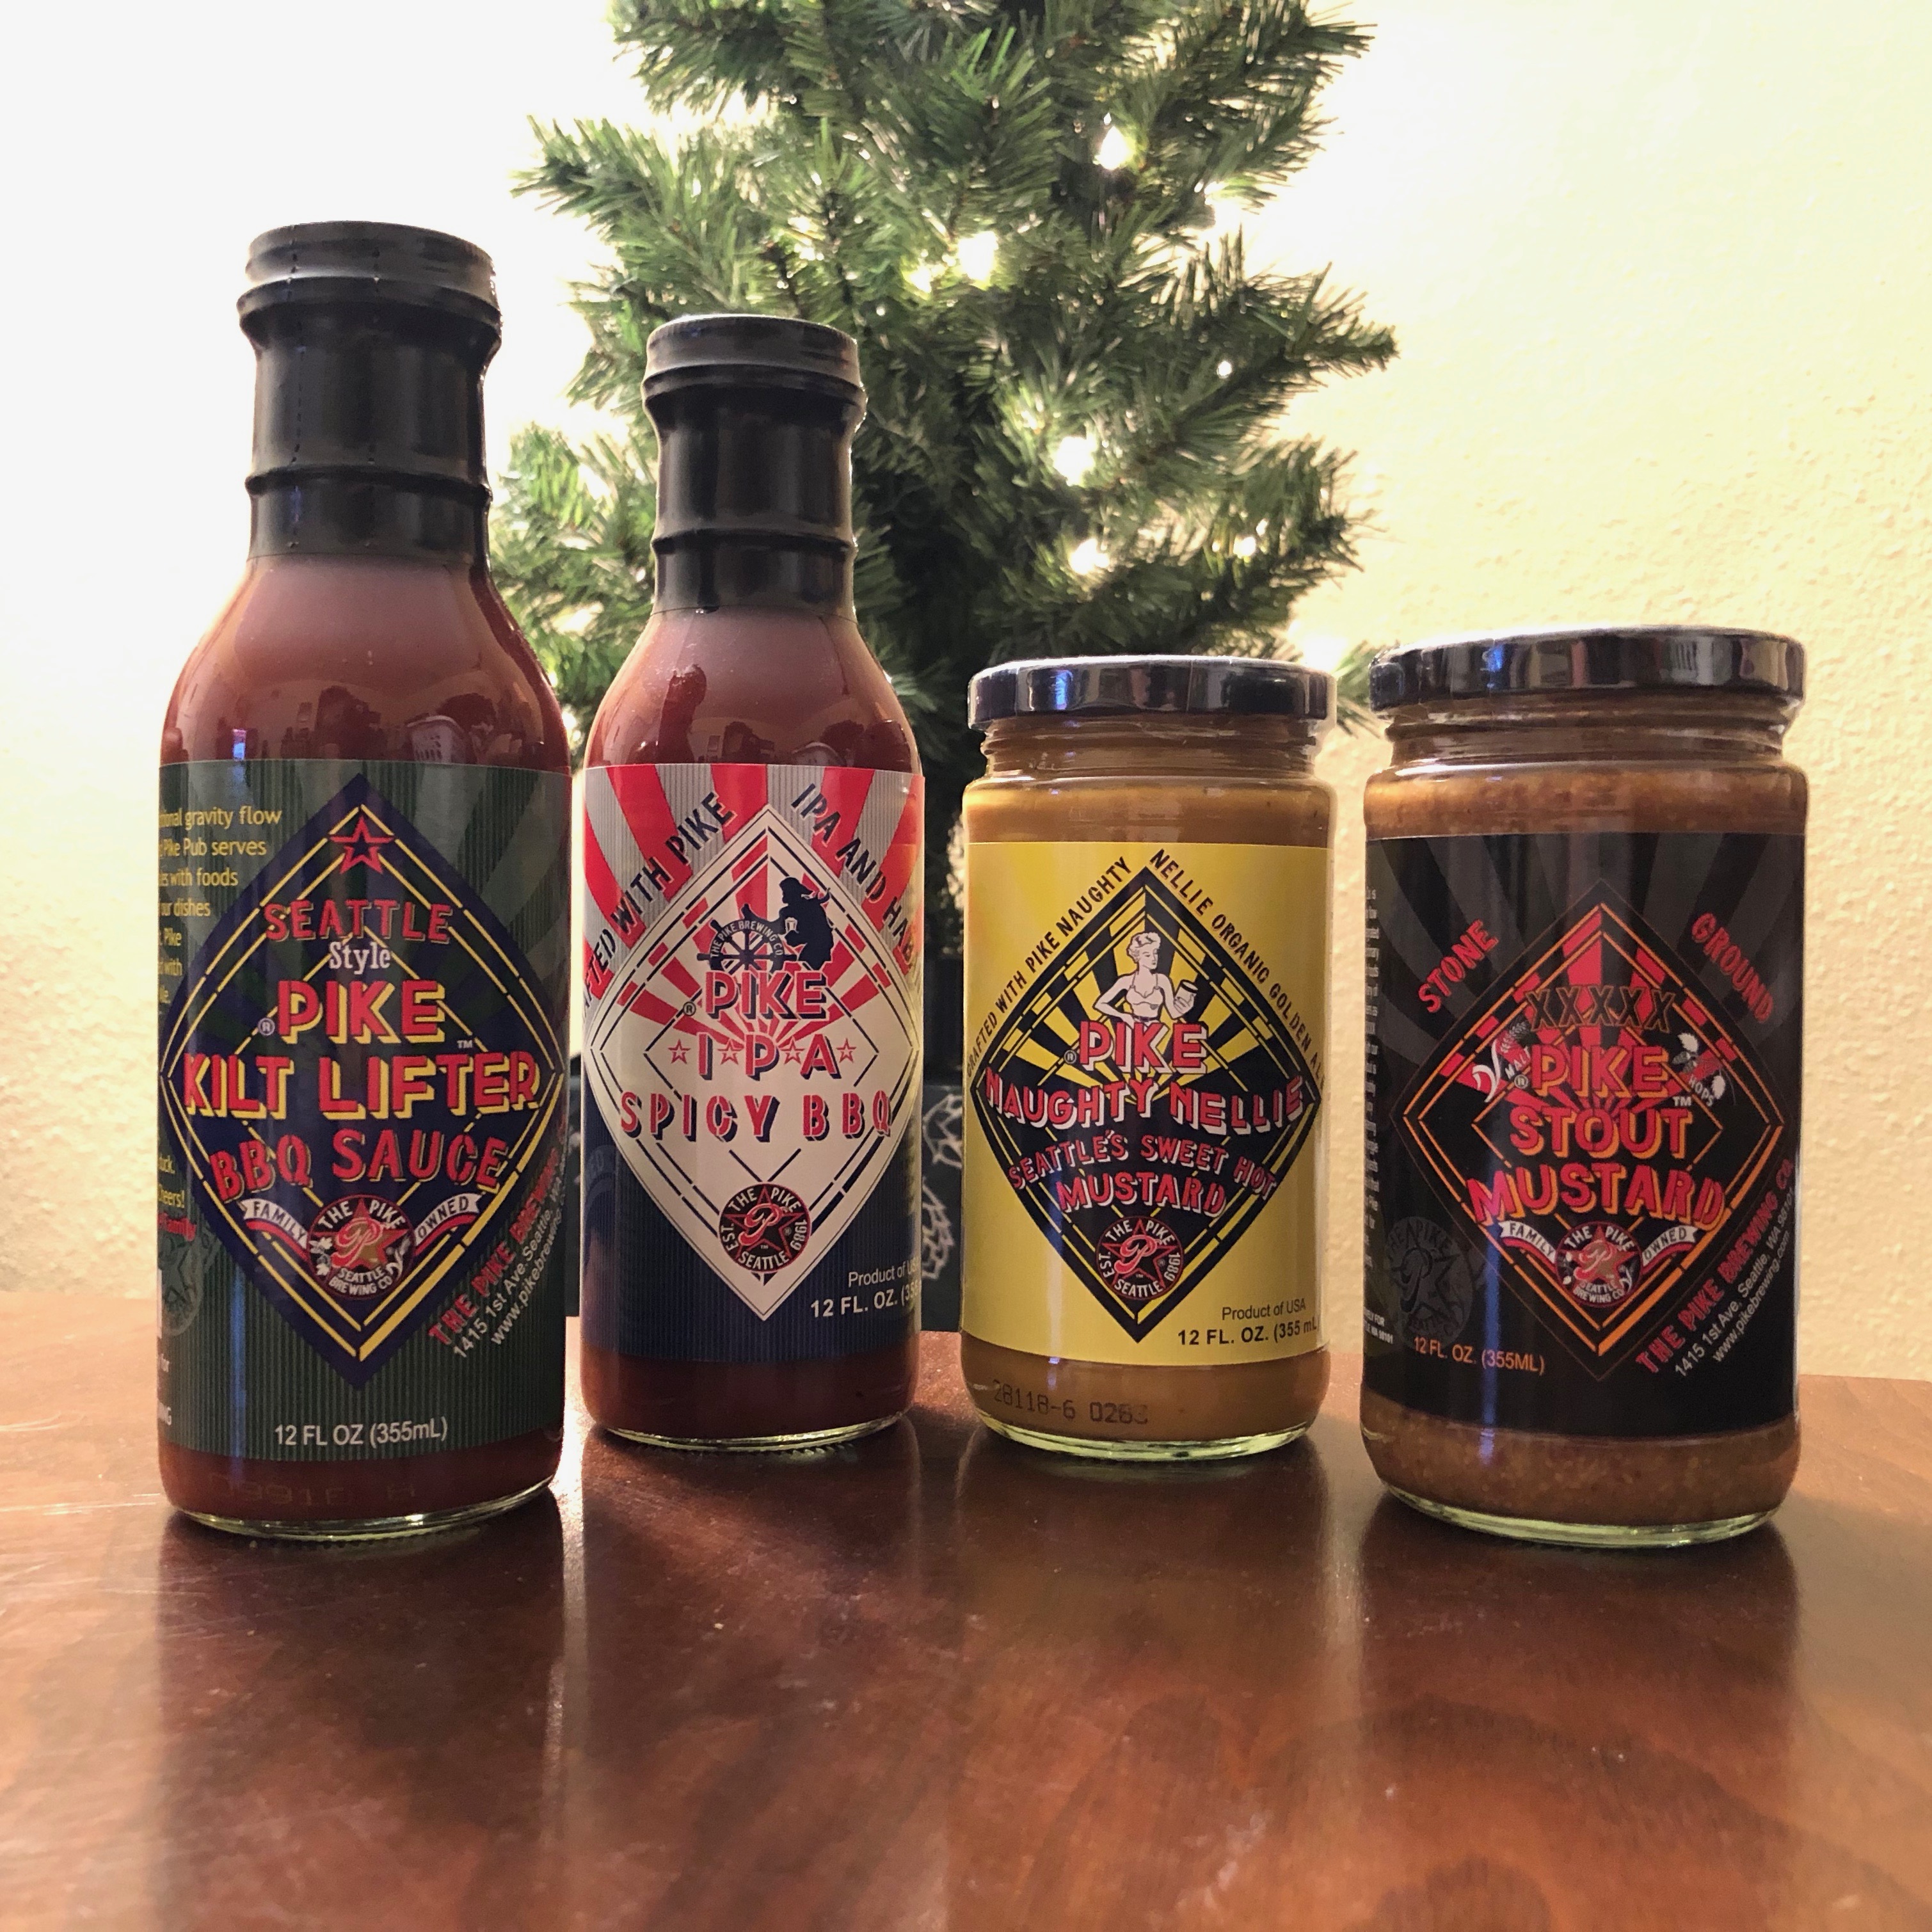 Pike Brewing offers an excellent assortment of condiments that incorporate its beers in them.